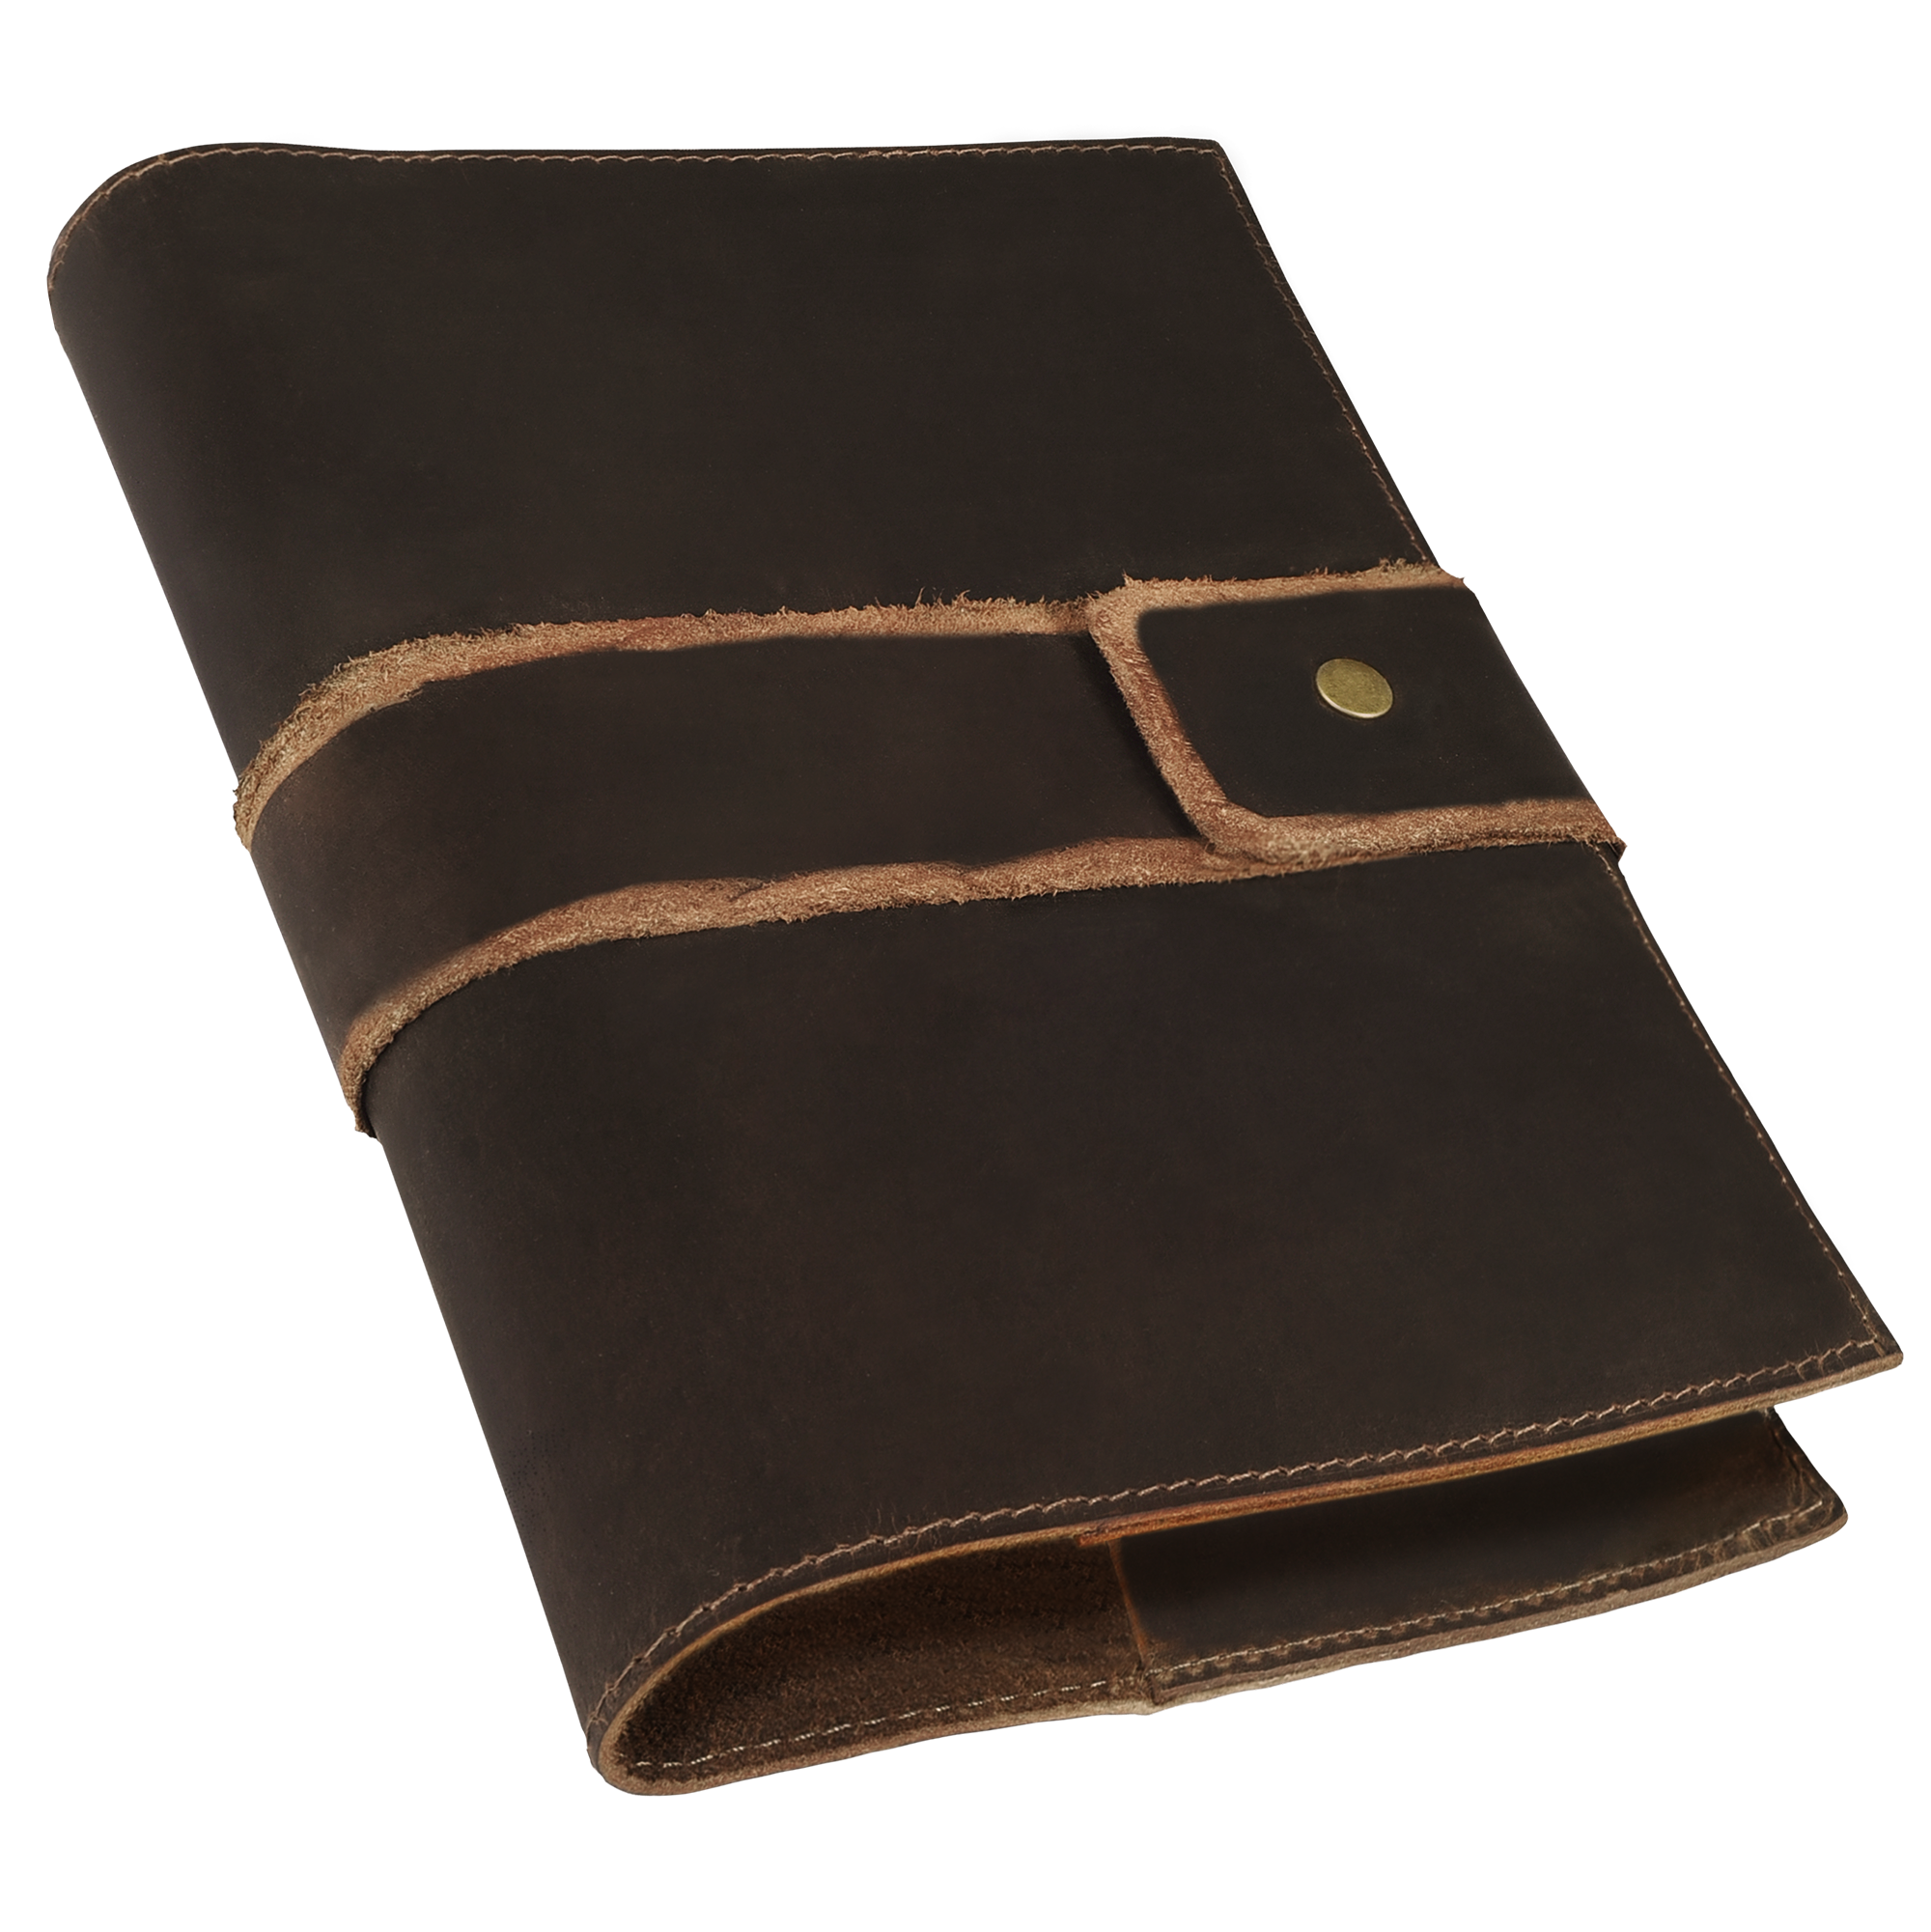 Vintage Leather Notebook Cover - Rustic Teak (A5)